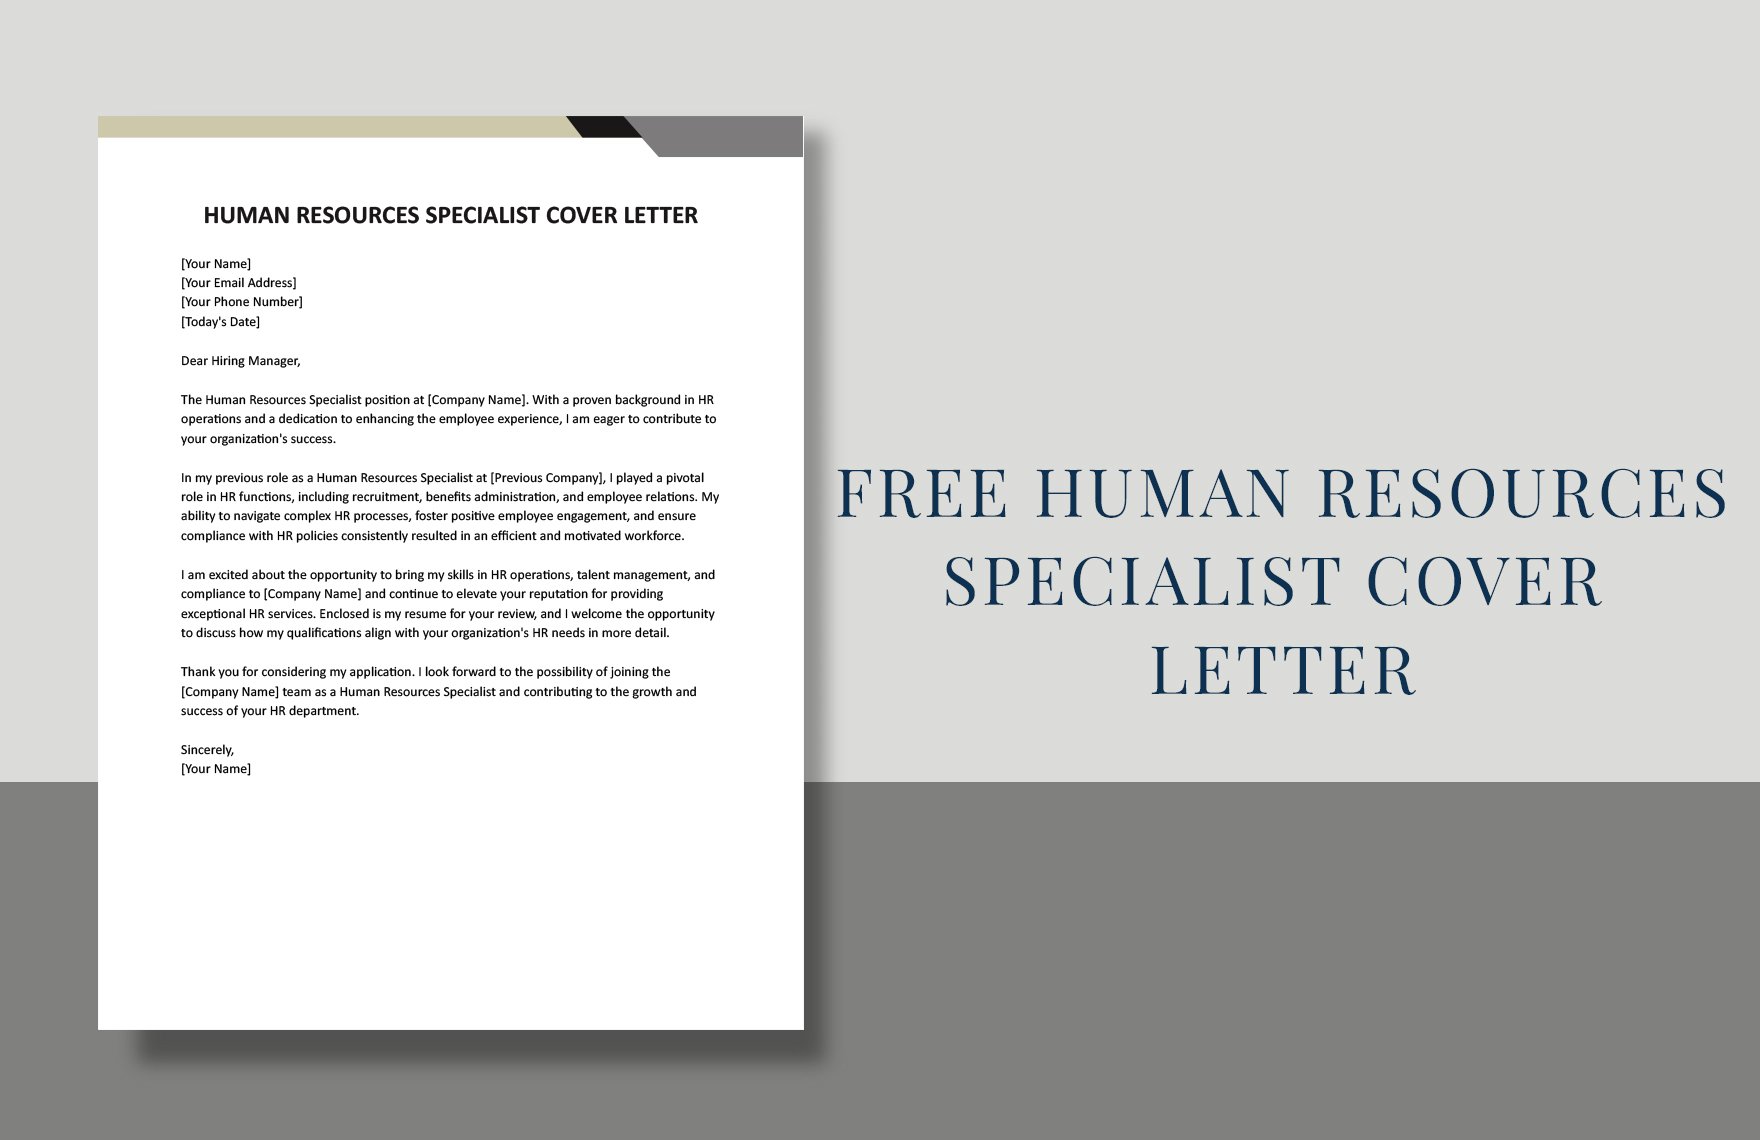 Human Resources Specialist Cover Letter in Word, Google Docs